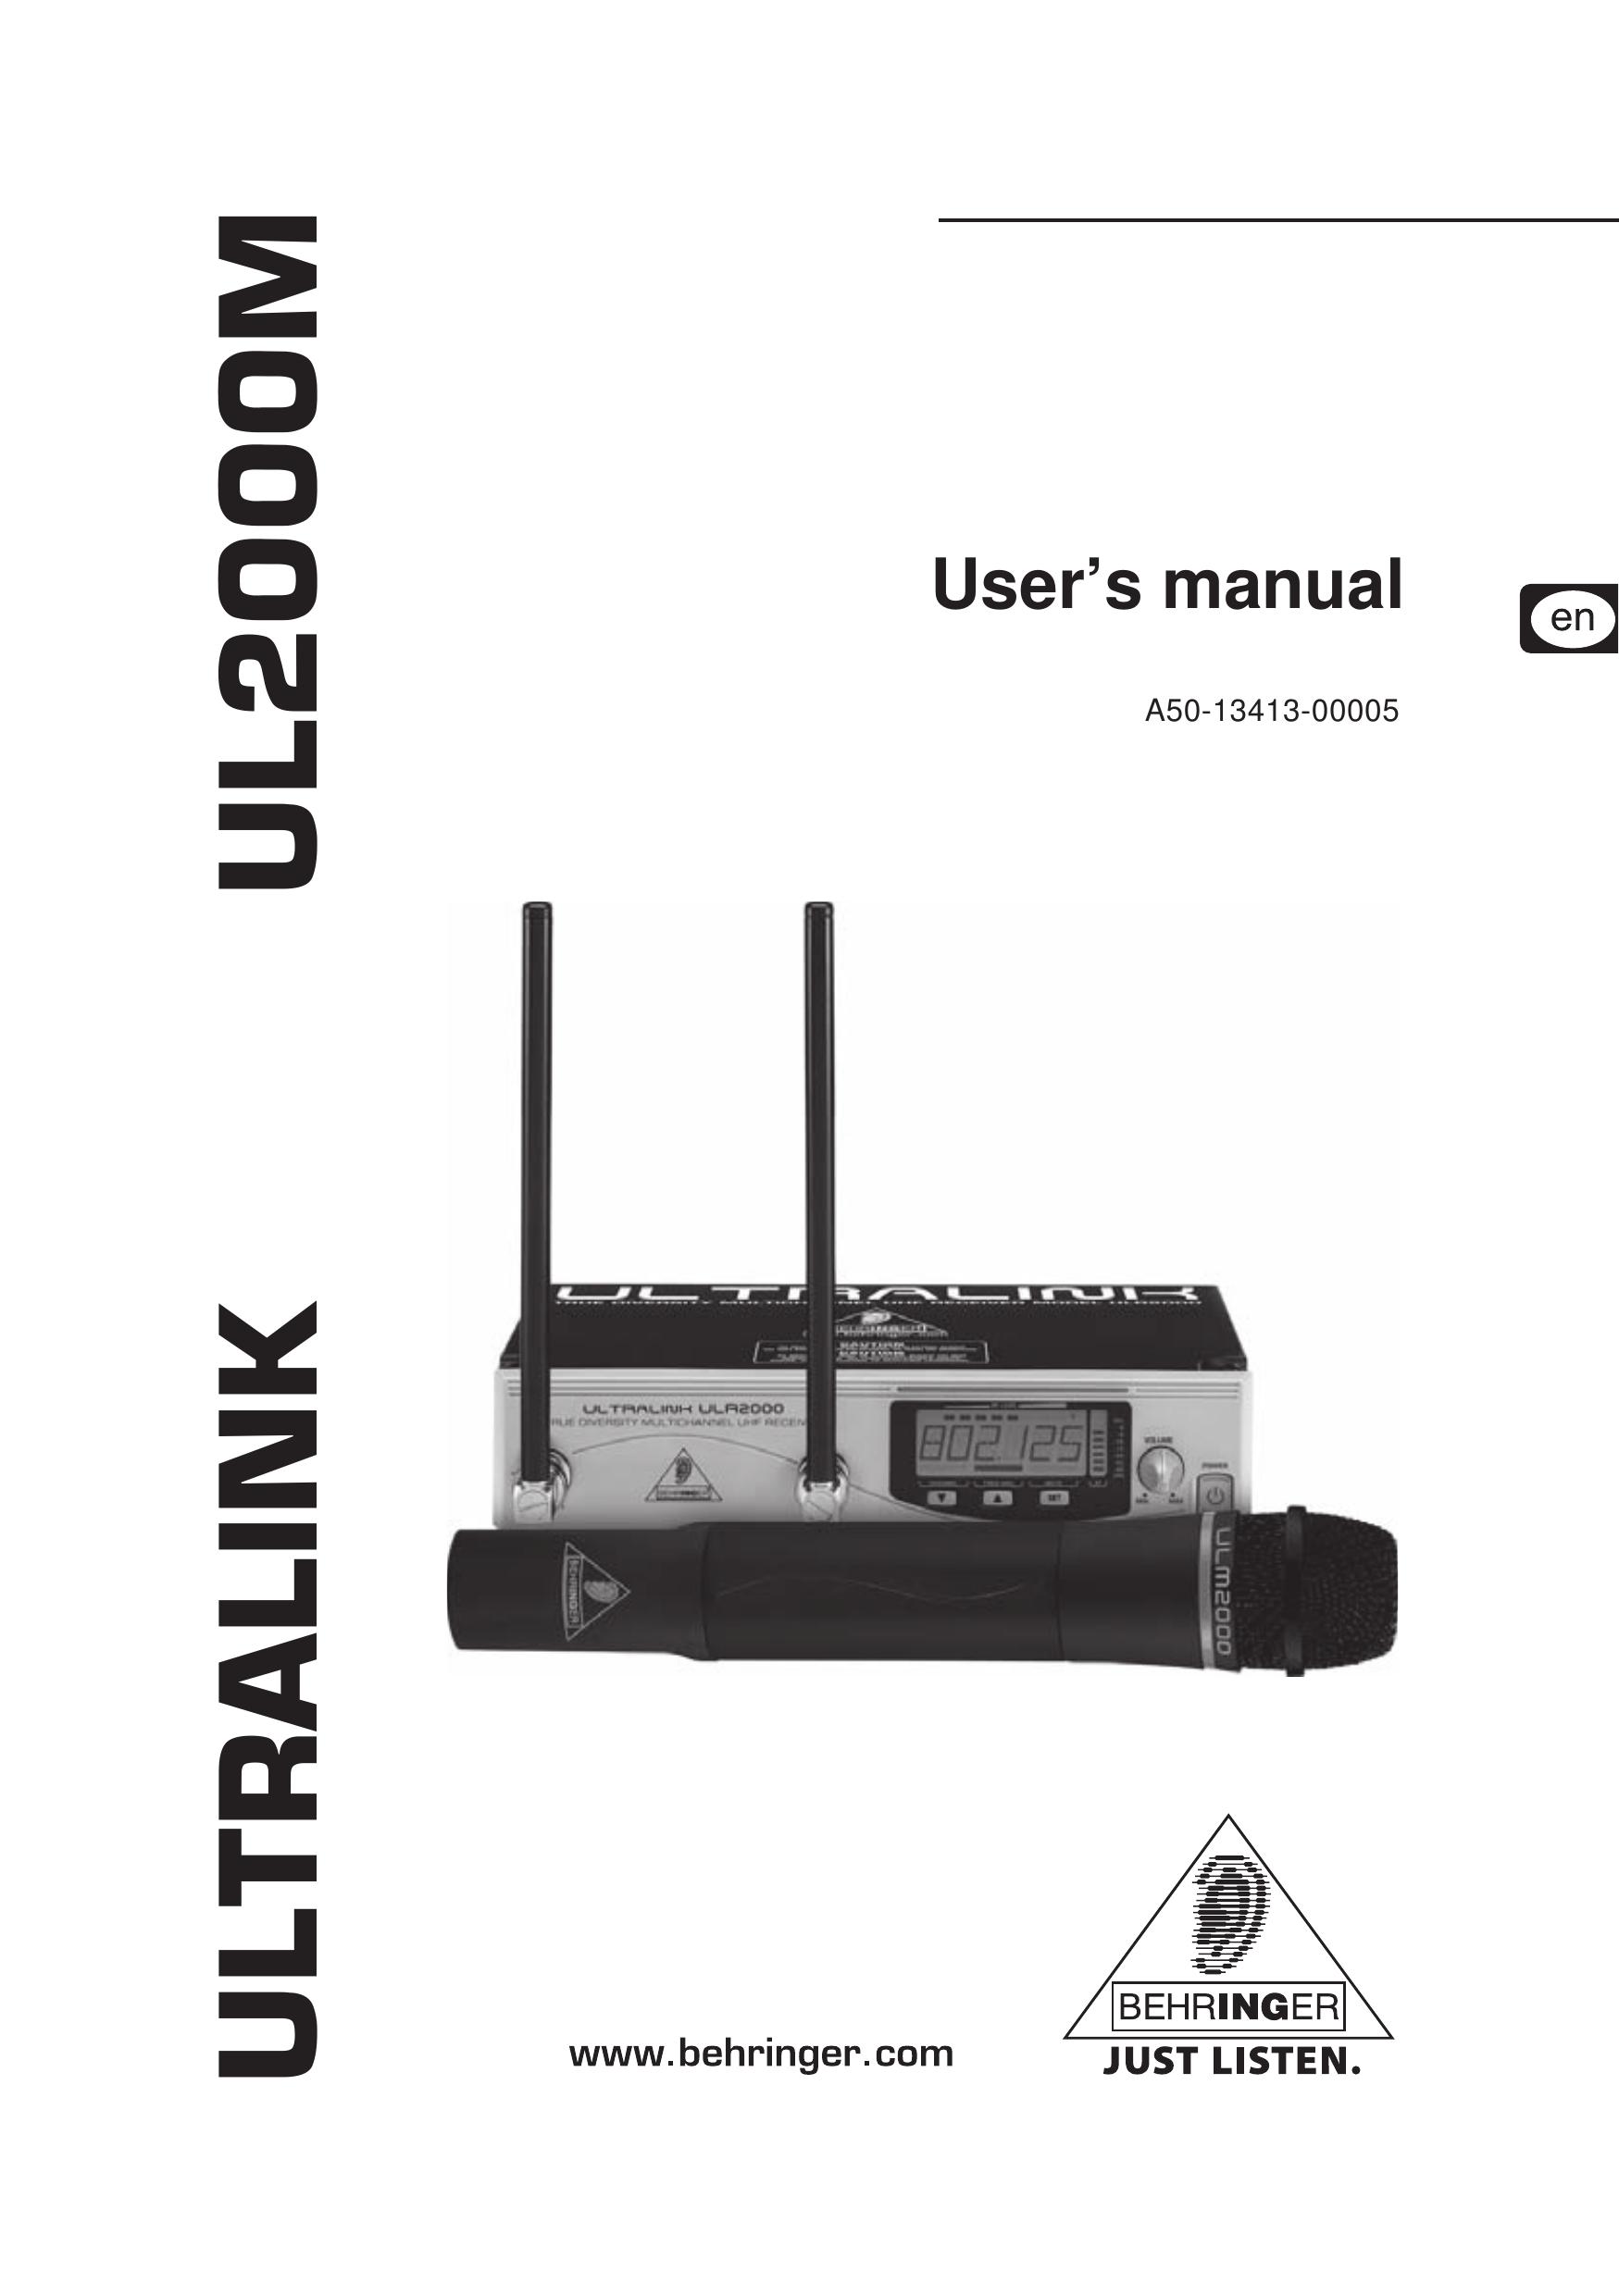 Behringer A50-13413-00005 Microphone User Manual